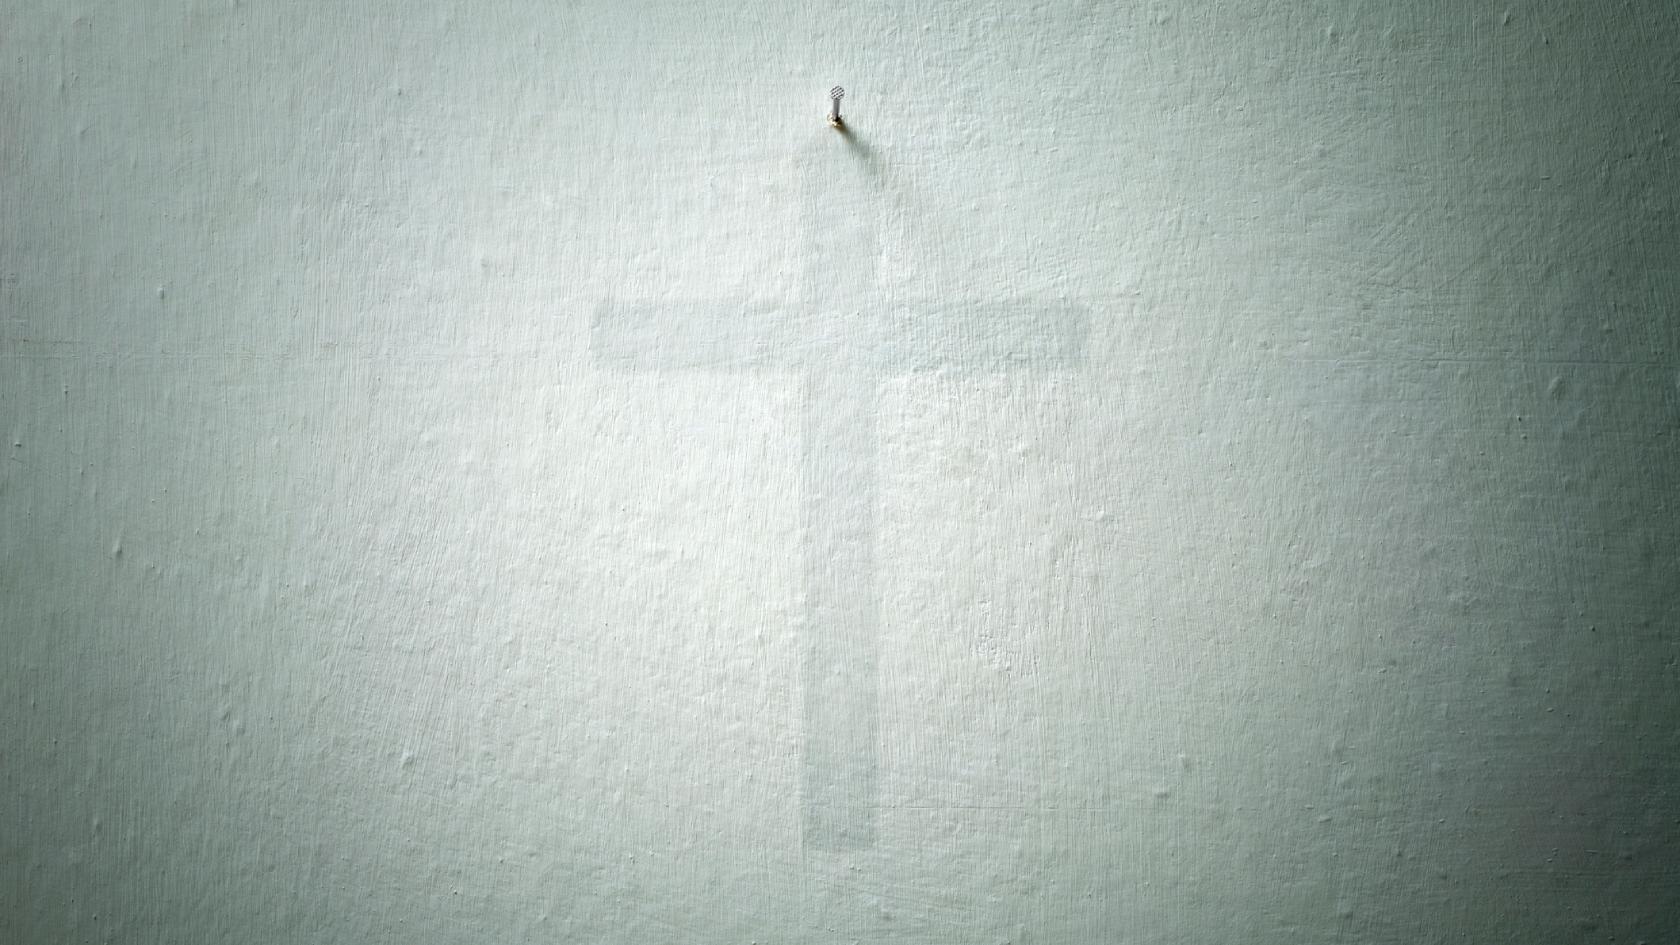 Shadow of a crucifix on the wall